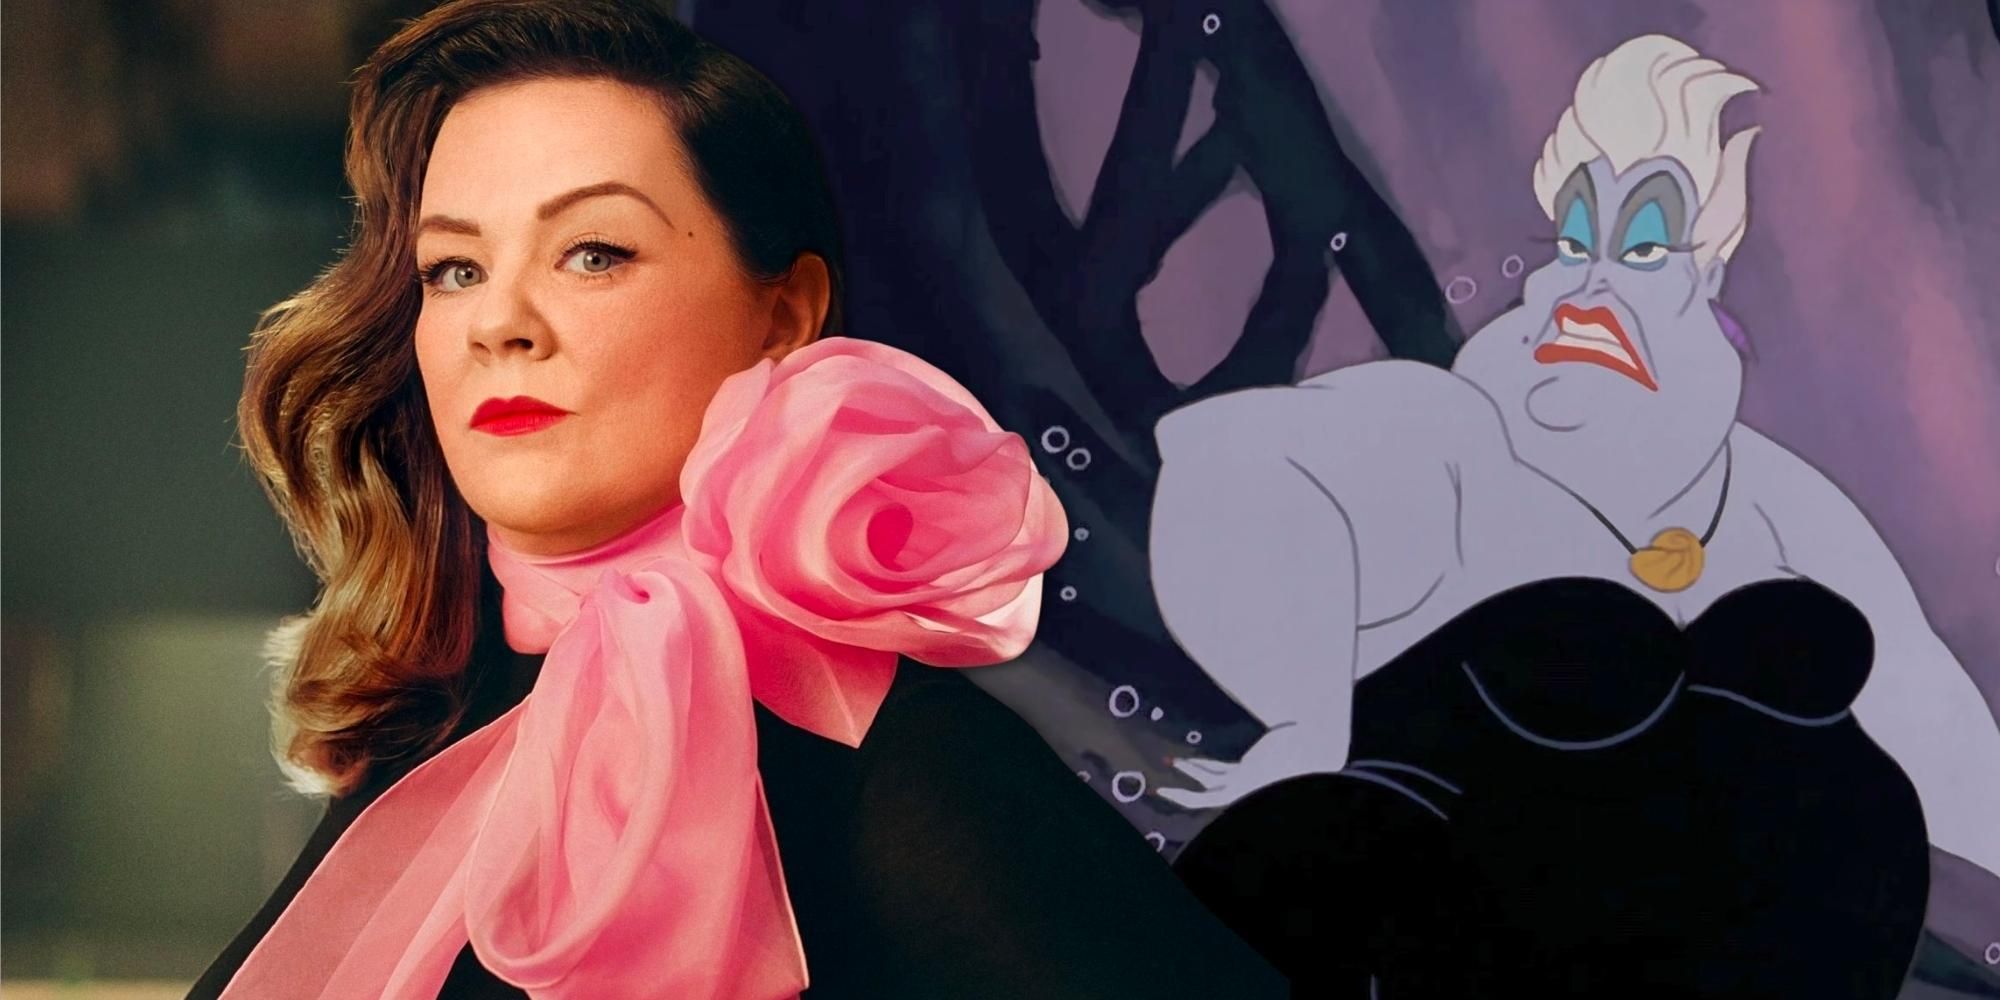 Melissa McCarthy in front of a still of Ursula from the Disney animated film the Little Mermaid